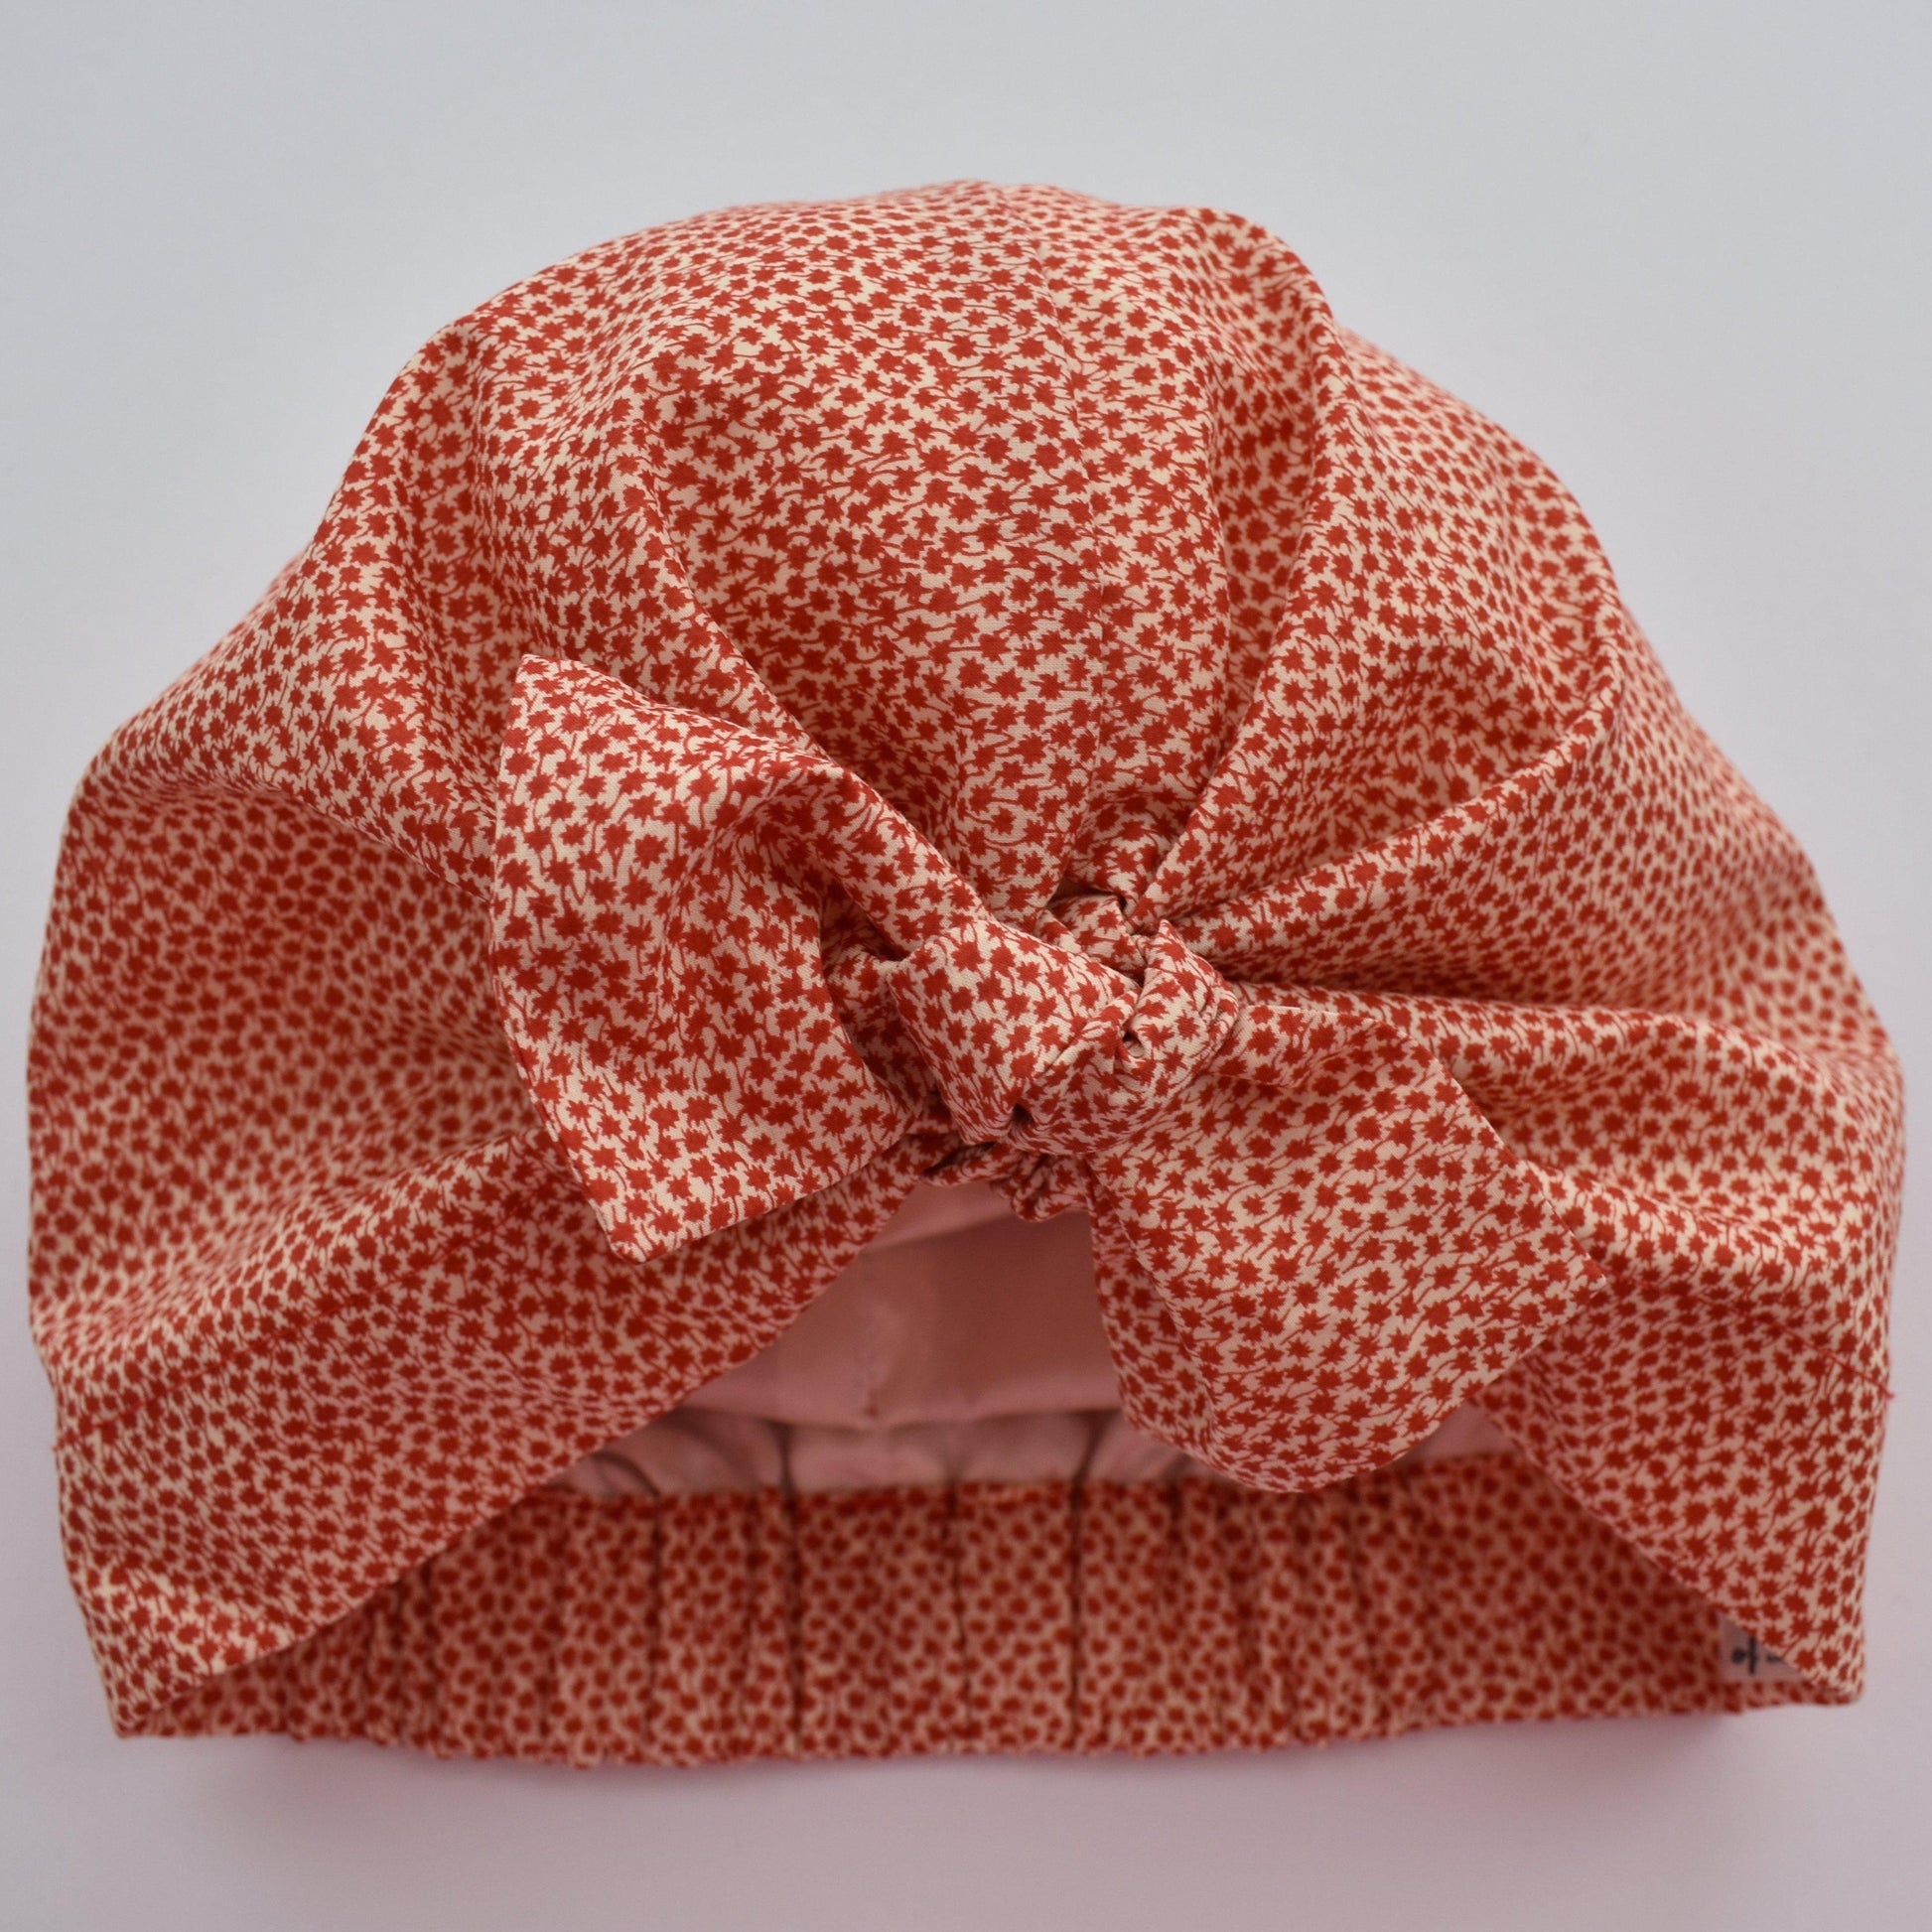 100% silk lined Turban & Head wrap in Red and White Floral Marco Liberty print - Tot Knots of Brighton